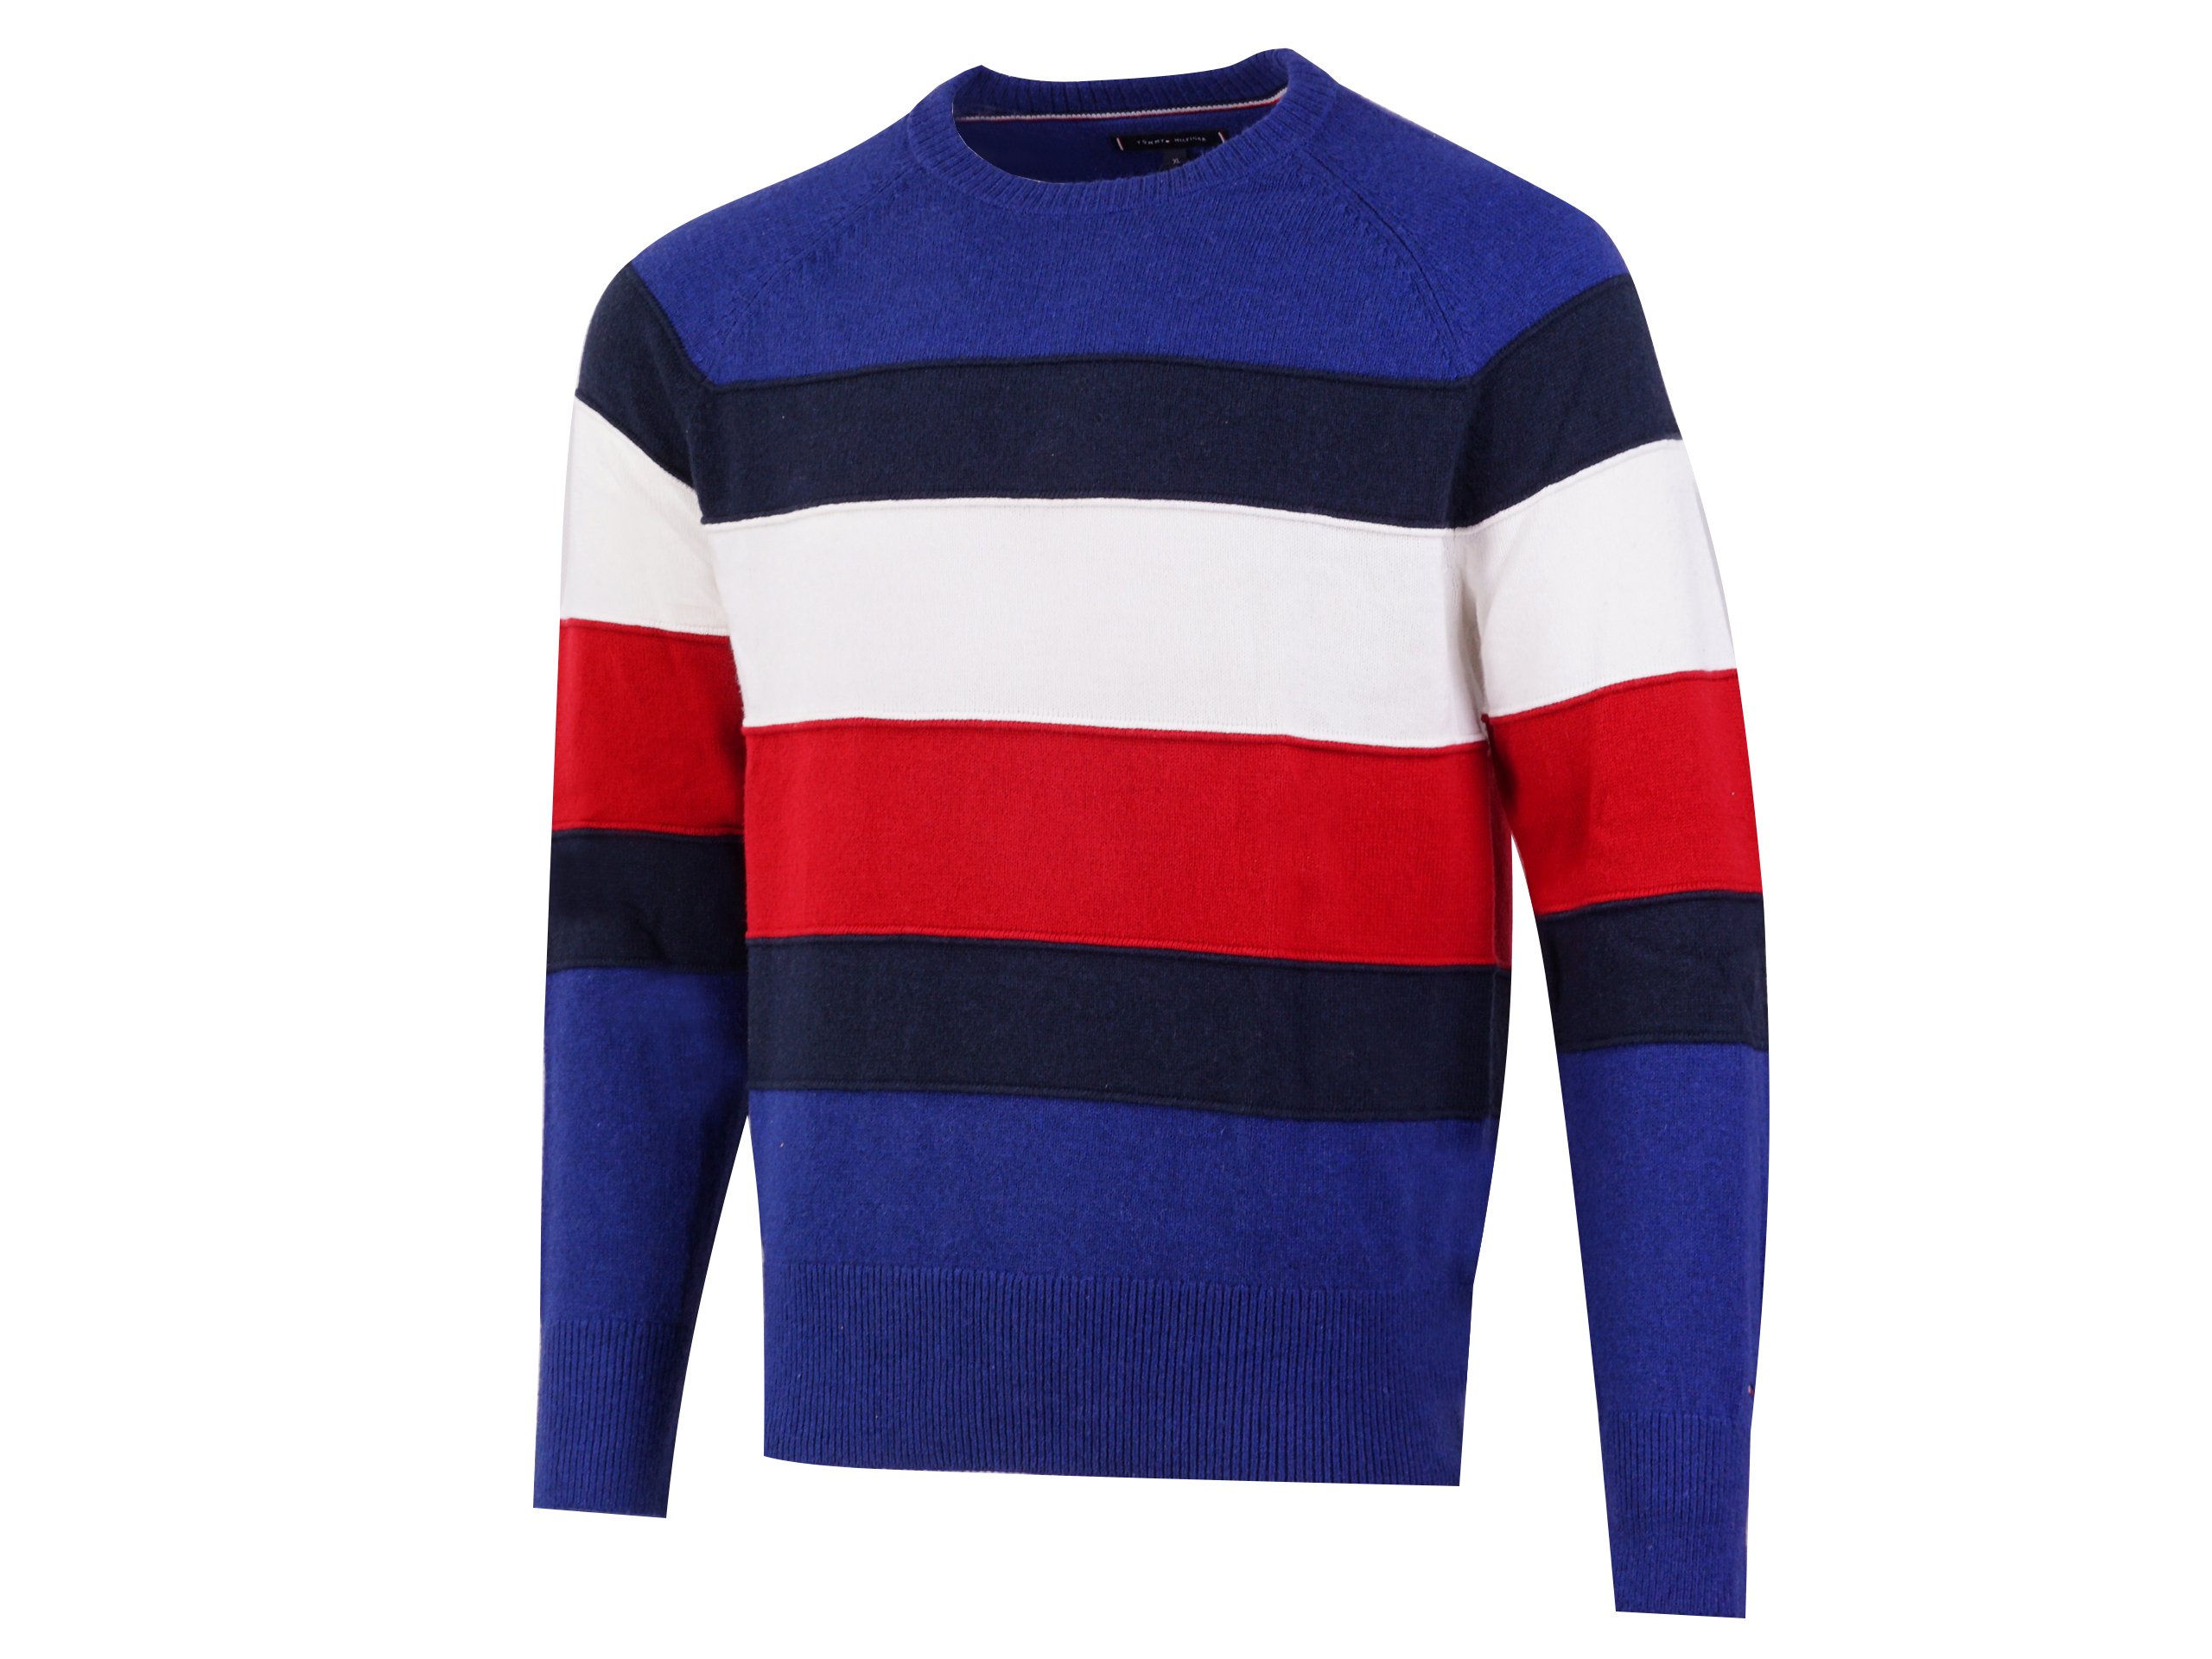 Tommy Hilfiger - a Blue Red - / White - / Navy footwear supplier Colorblock trusted \\ / - Tommy Kicks | Hilfiger of Sweater branded Mens Sport MW0MW07853-436 | sports Stripe